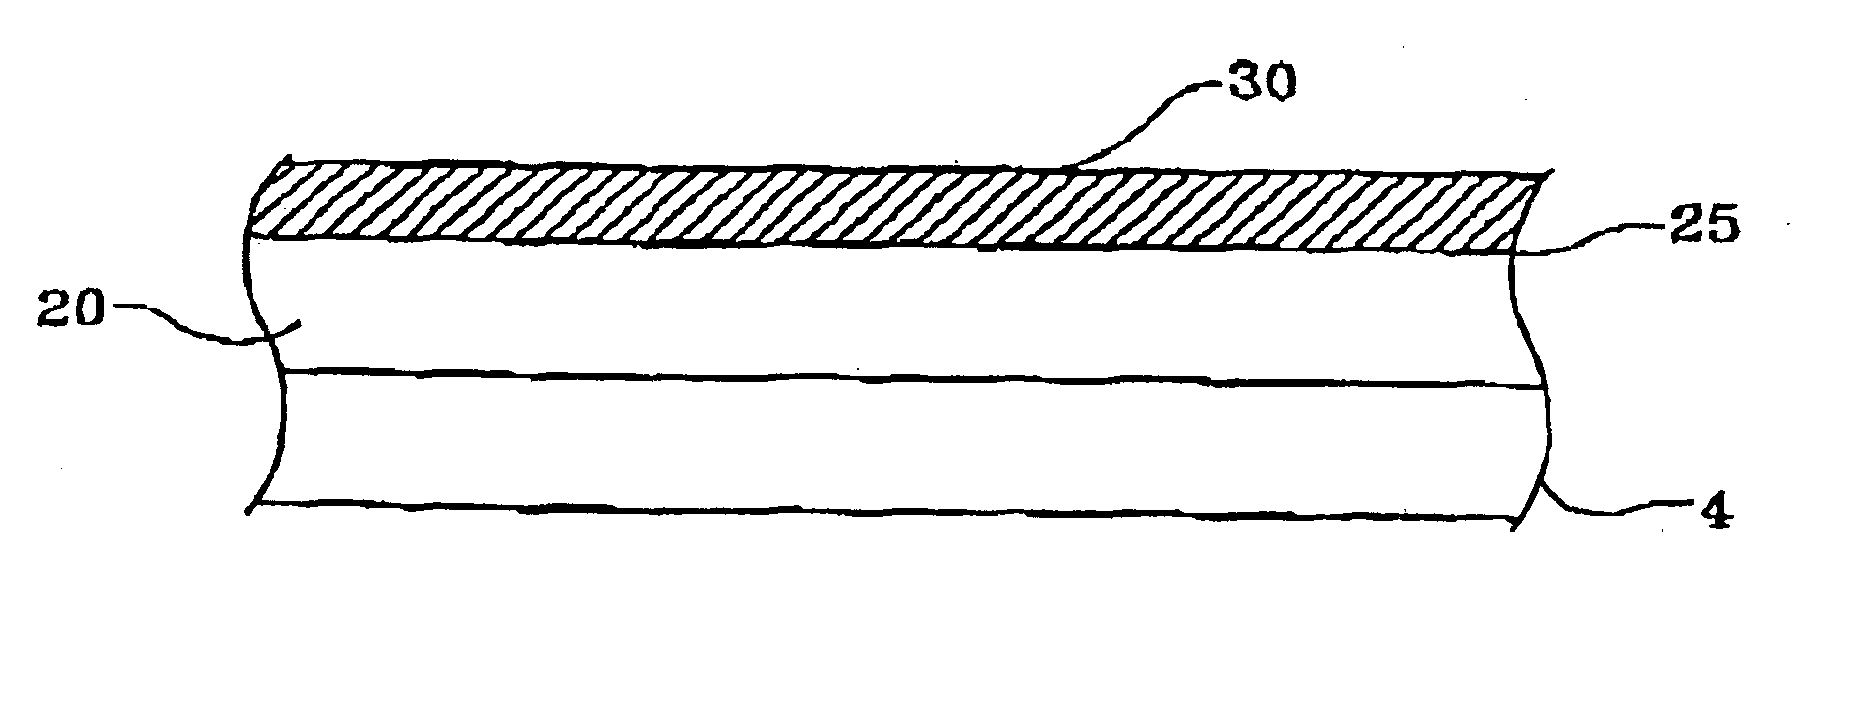 Method of controlling zinc-doping in a copper-zinc alloy thin film electroplated on a copper surface and a semiconductor device thereby formed